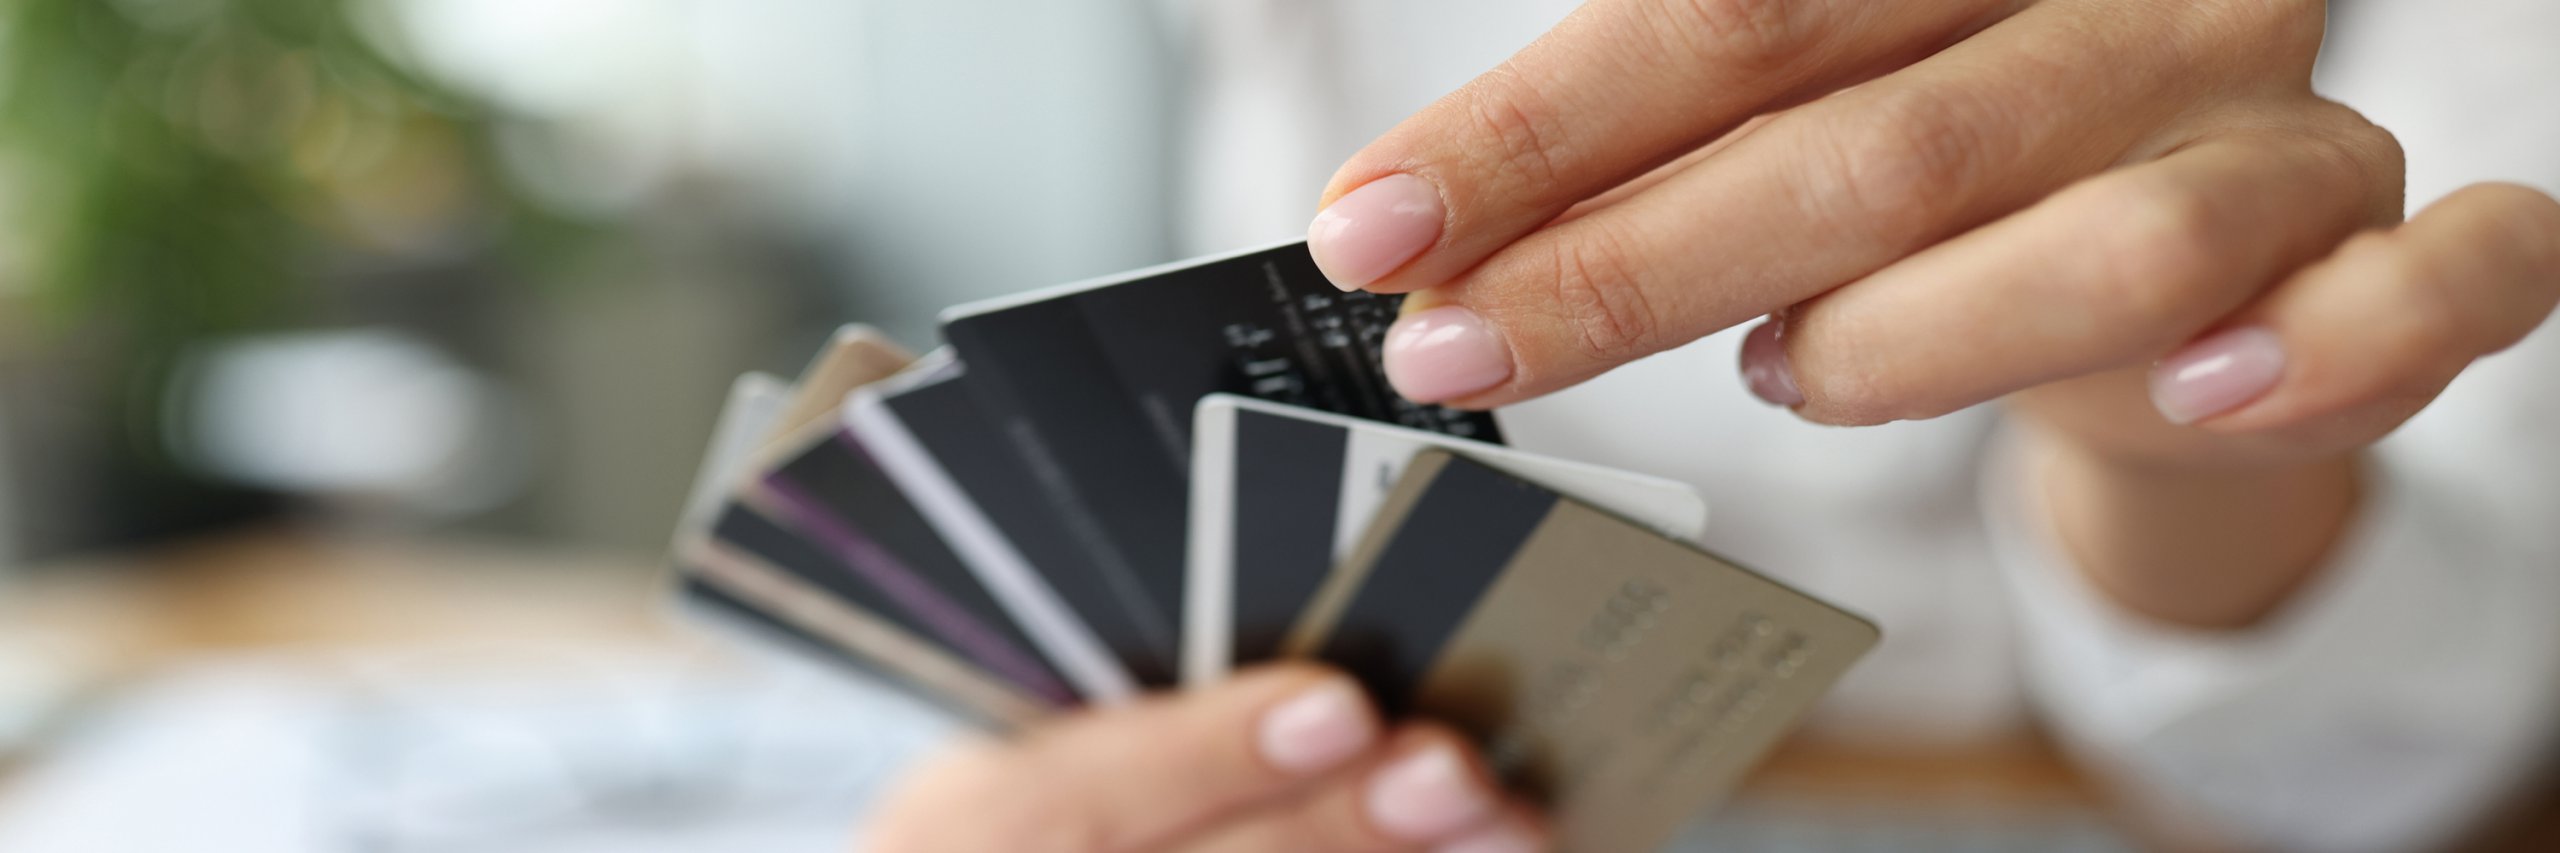 5 Tips to Efficiently Manage Your Business Credit Card